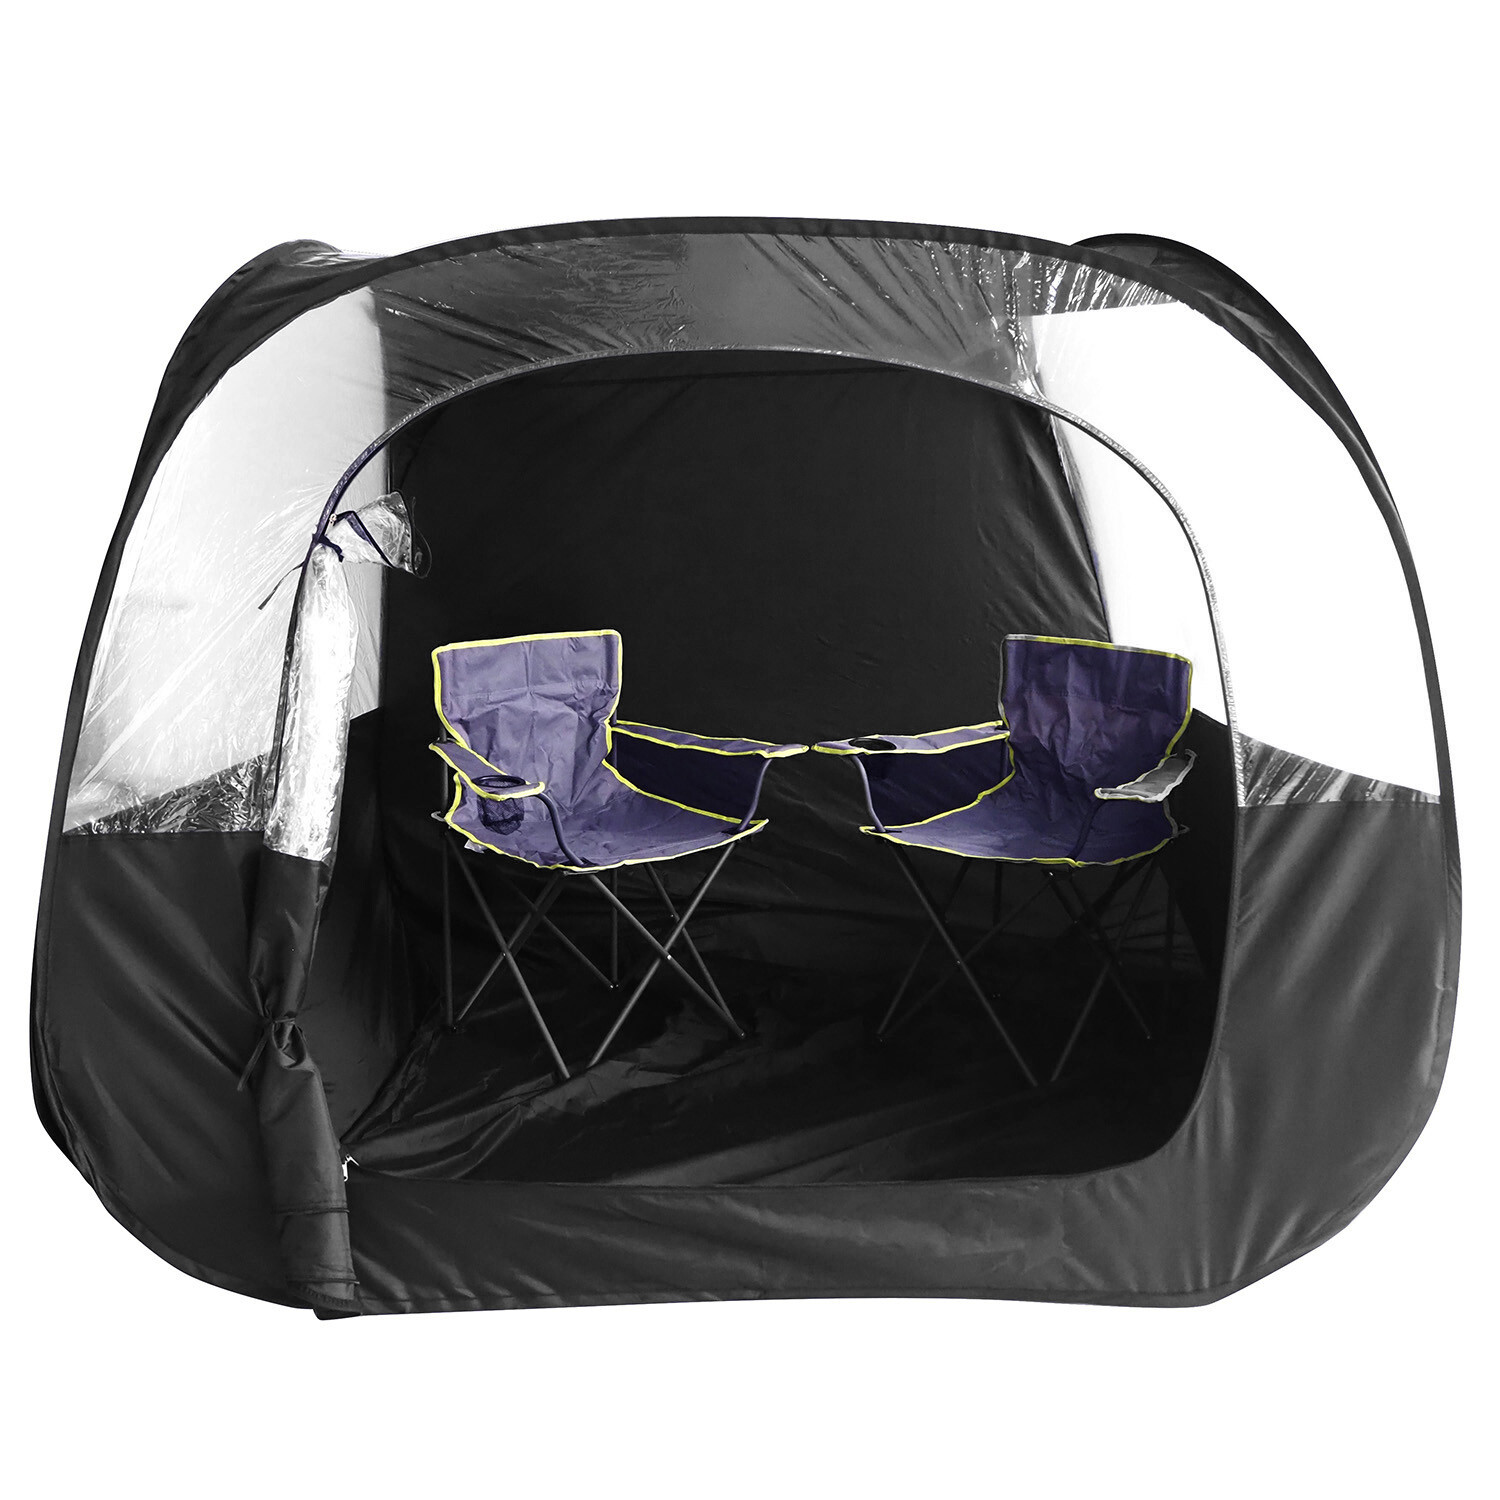 Active Sport Two Person Pop-Up Tent - Black Image